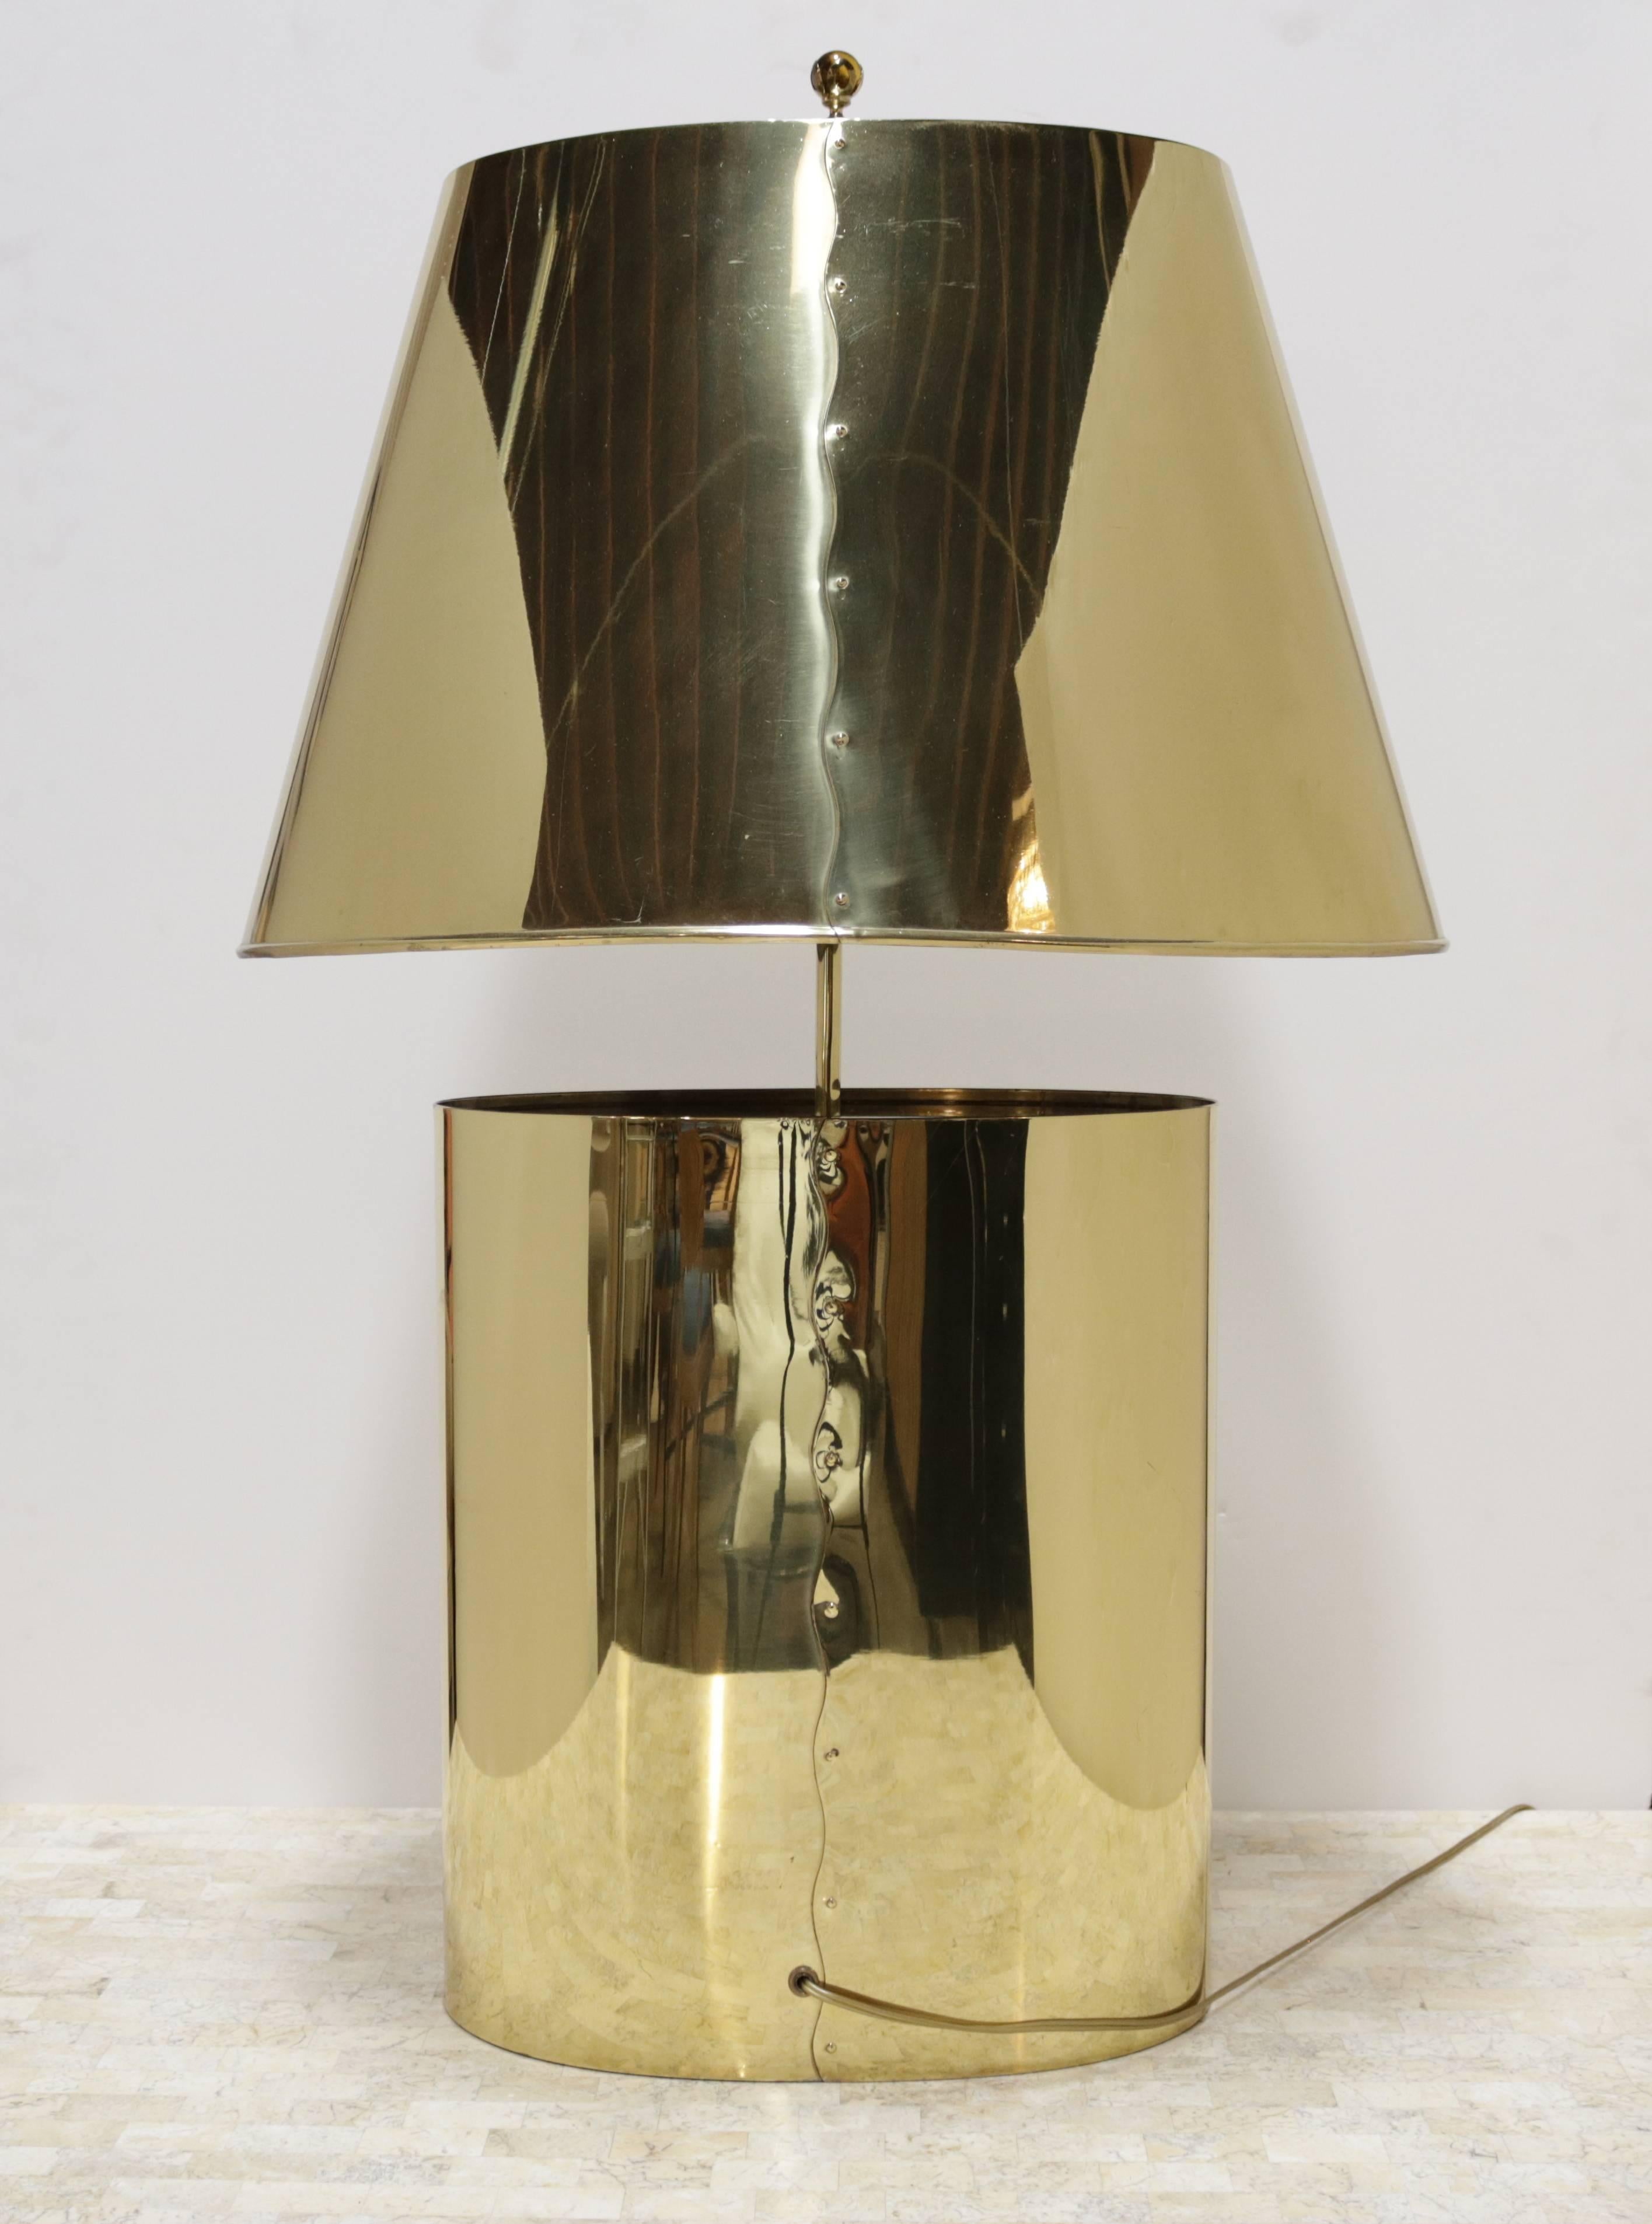 Golden polished brass table lamp from the 1970s. Both base and lampshade are constructed of gently folded brass and joined at one seam in a decorative manner. The finial is constructed of brass and glass. A bronze glass closes the base of the